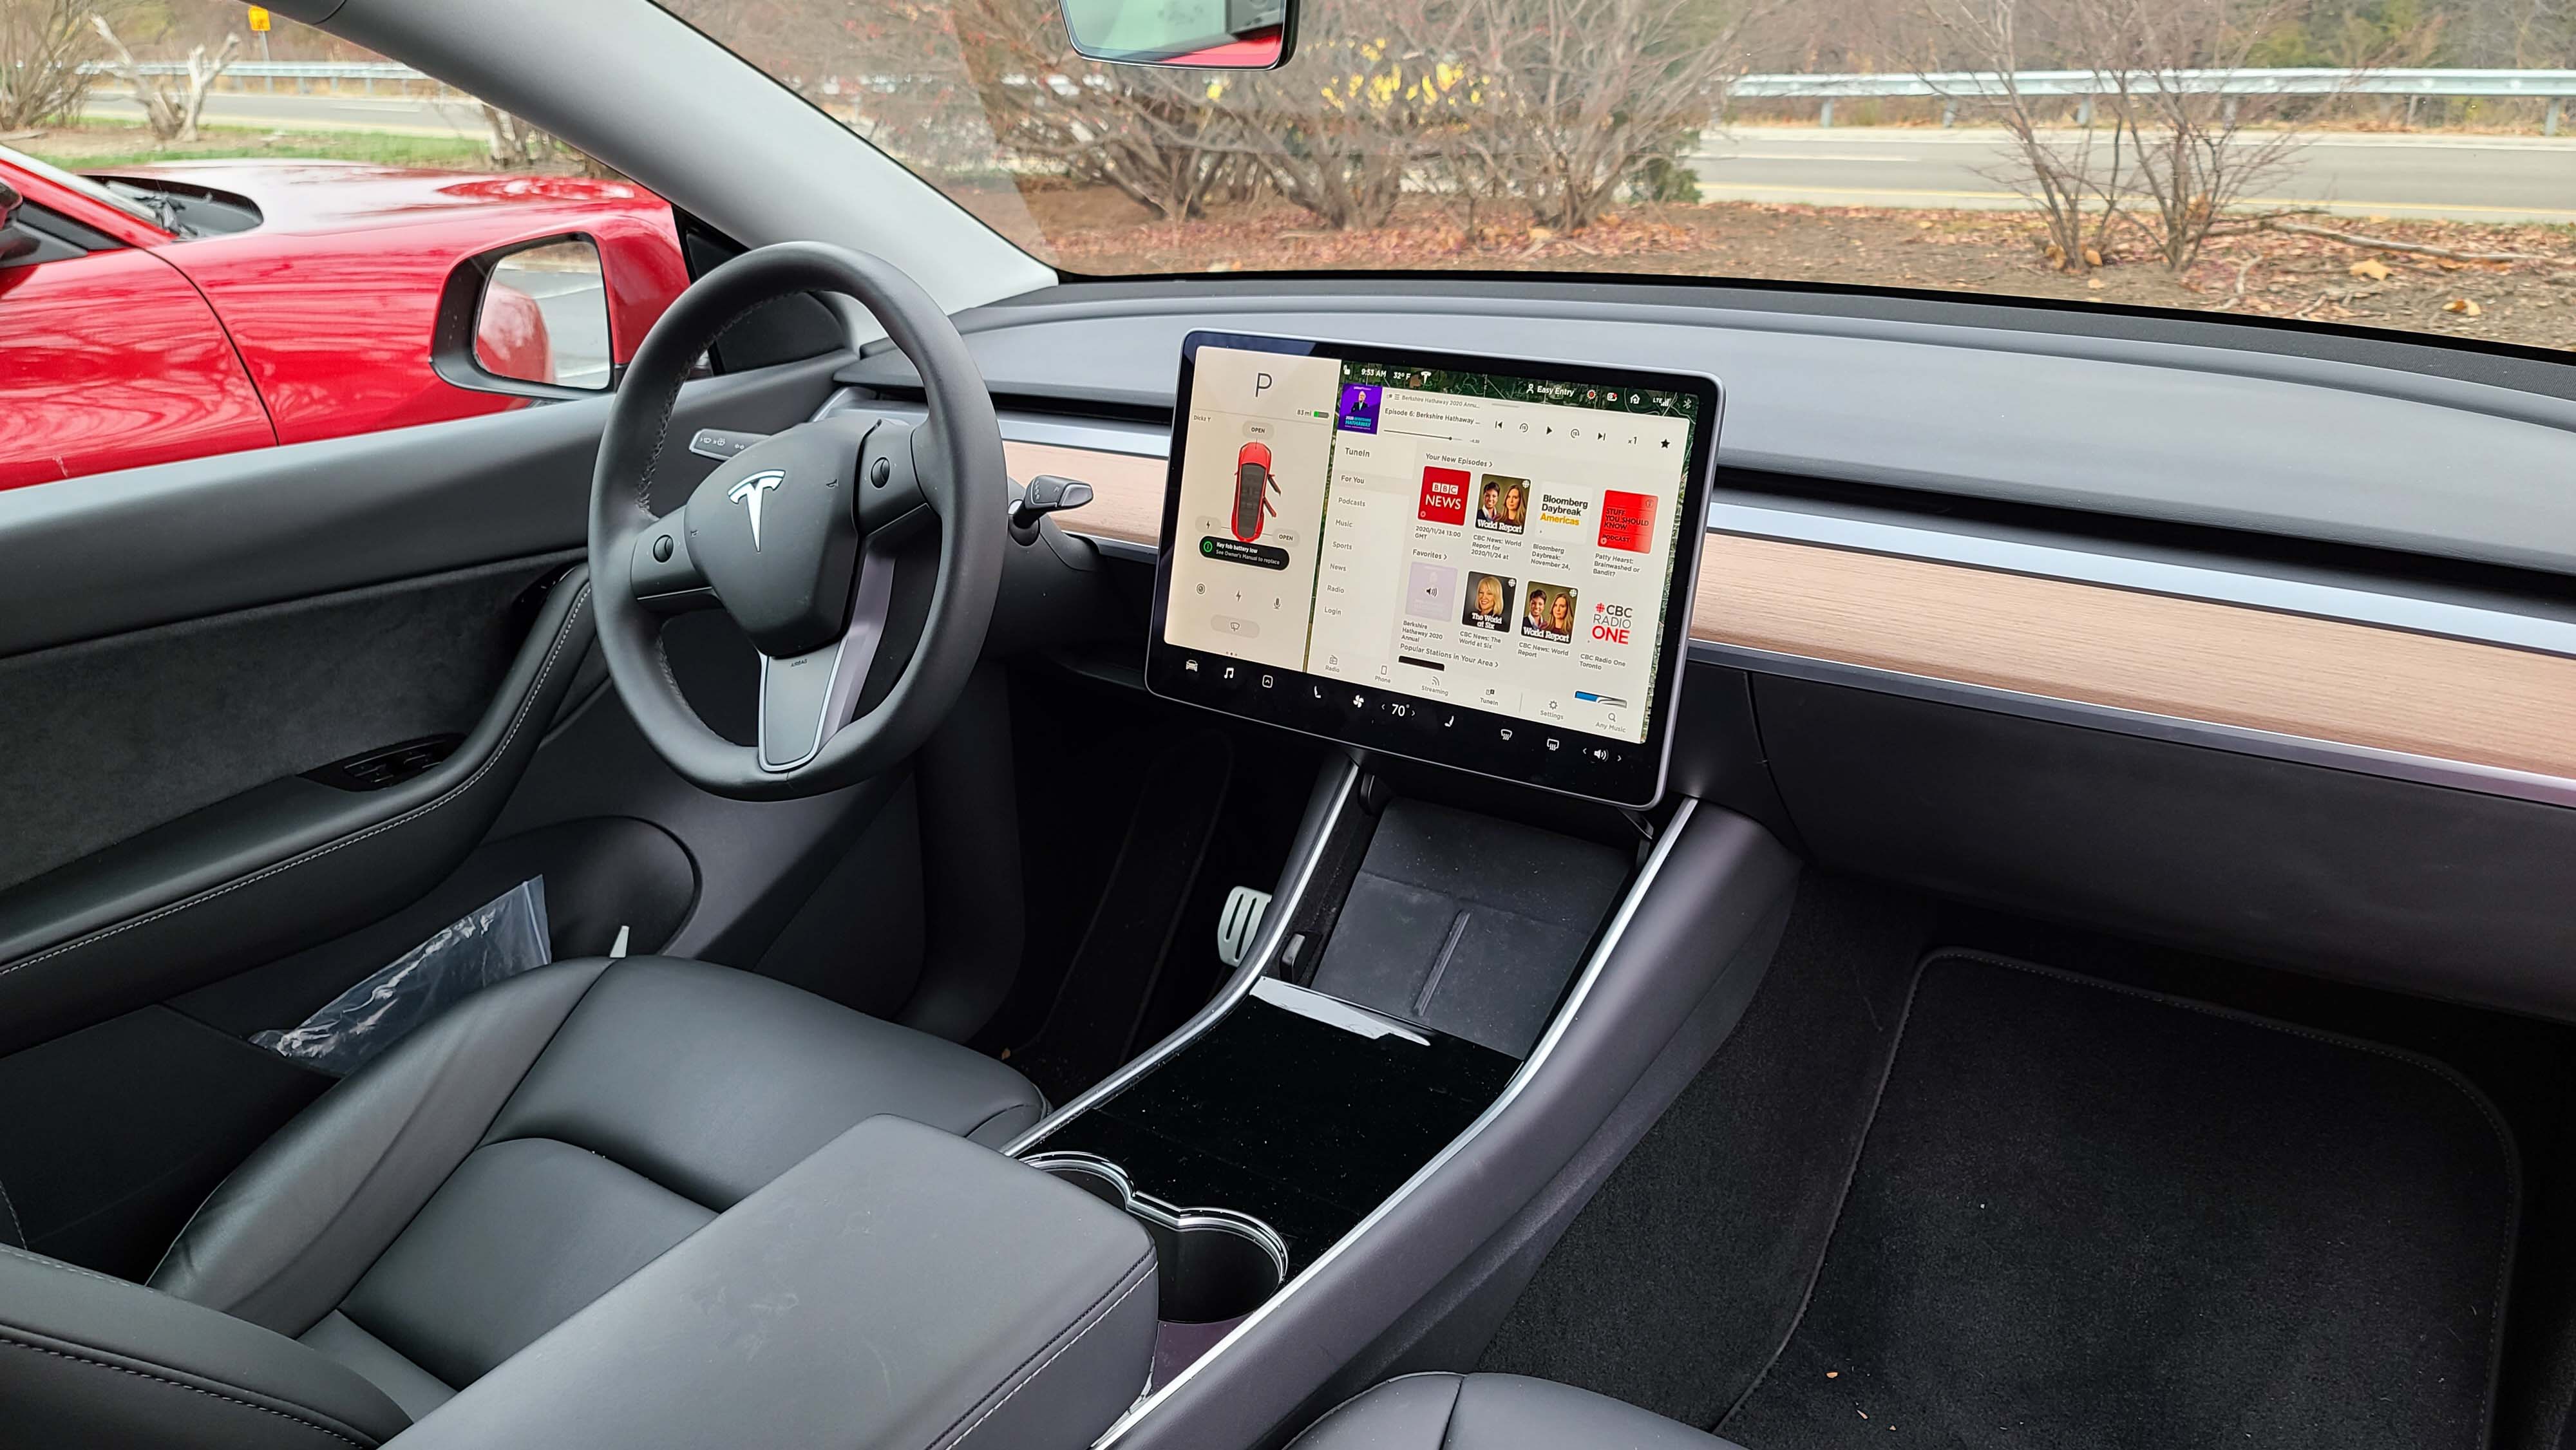 Compared to the 2021 Ford Mustang Mach-E, the Tesla Model Y has a more Spartan interior with a single-screen and minimal dash lines. The torquey, AWD performance, however, is similar.